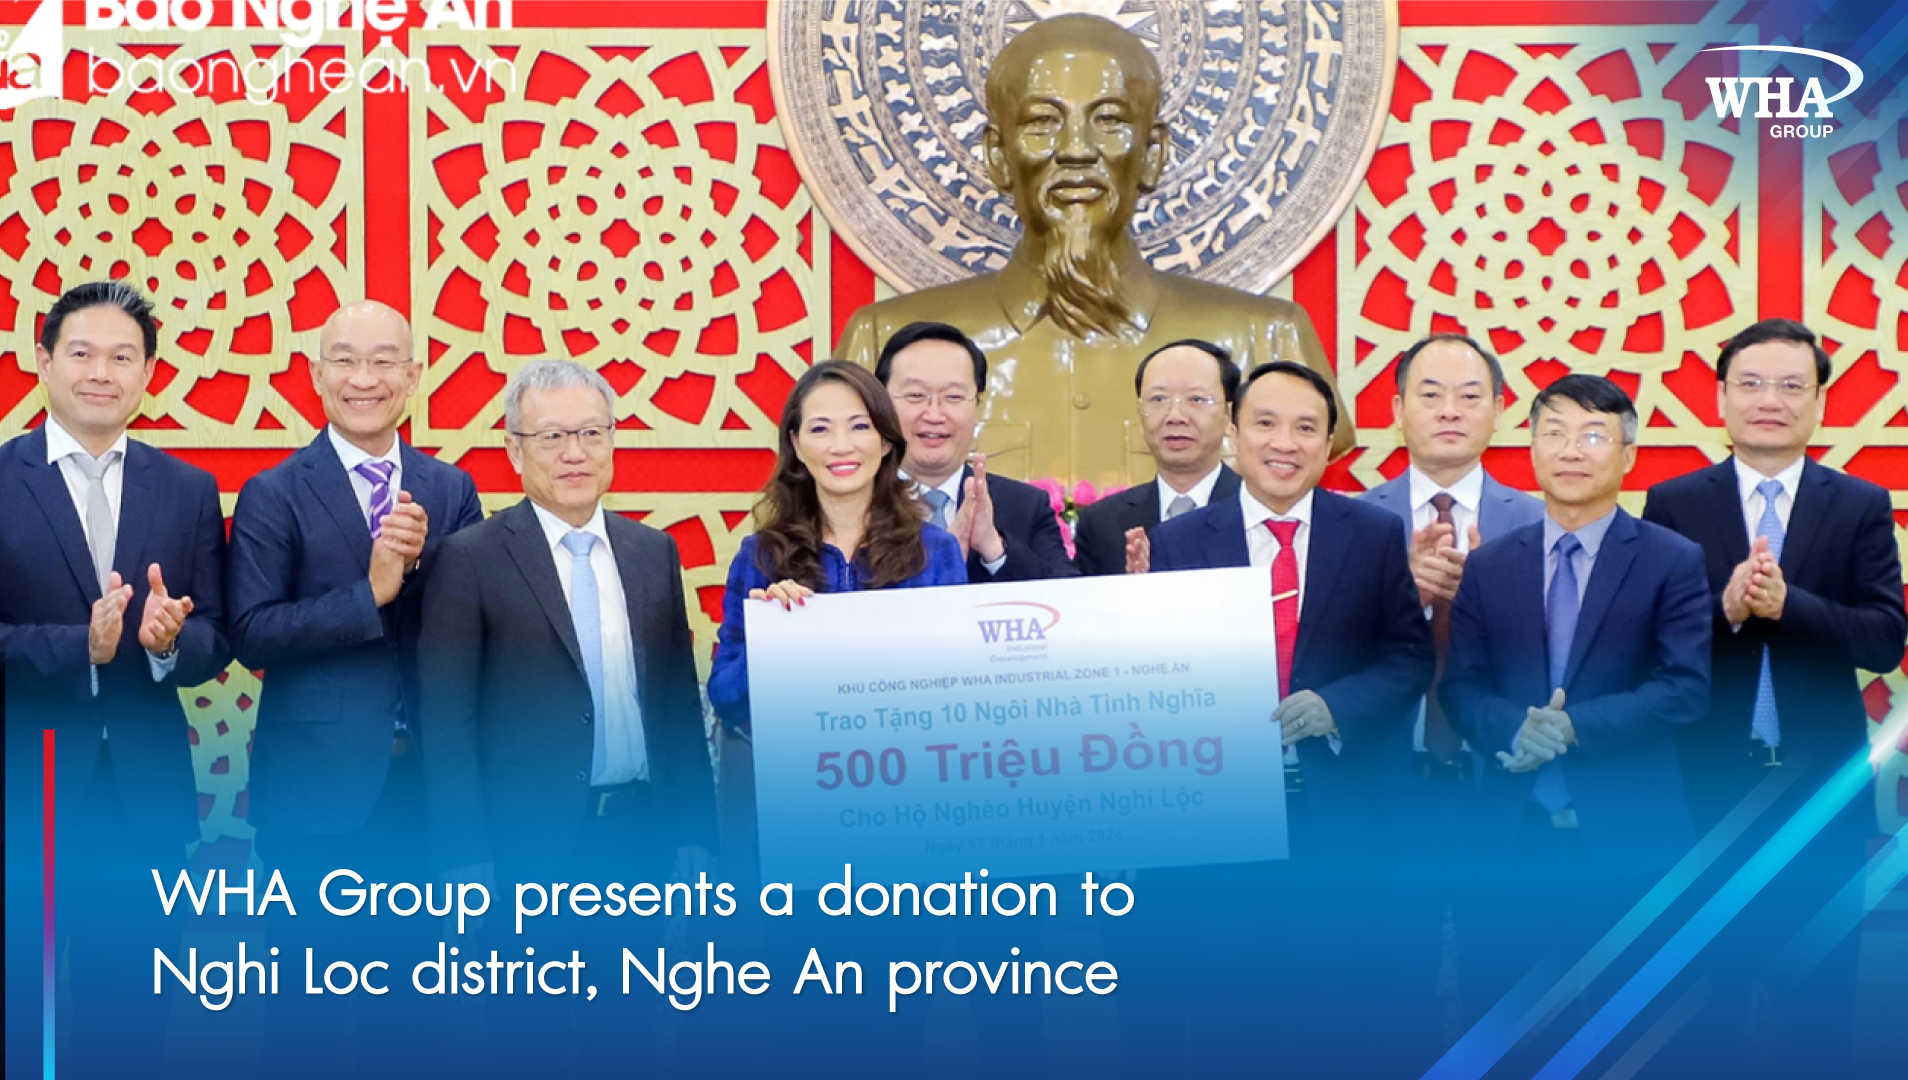 WHA Group presents a donation to Nghi Loc district, Nghe An province